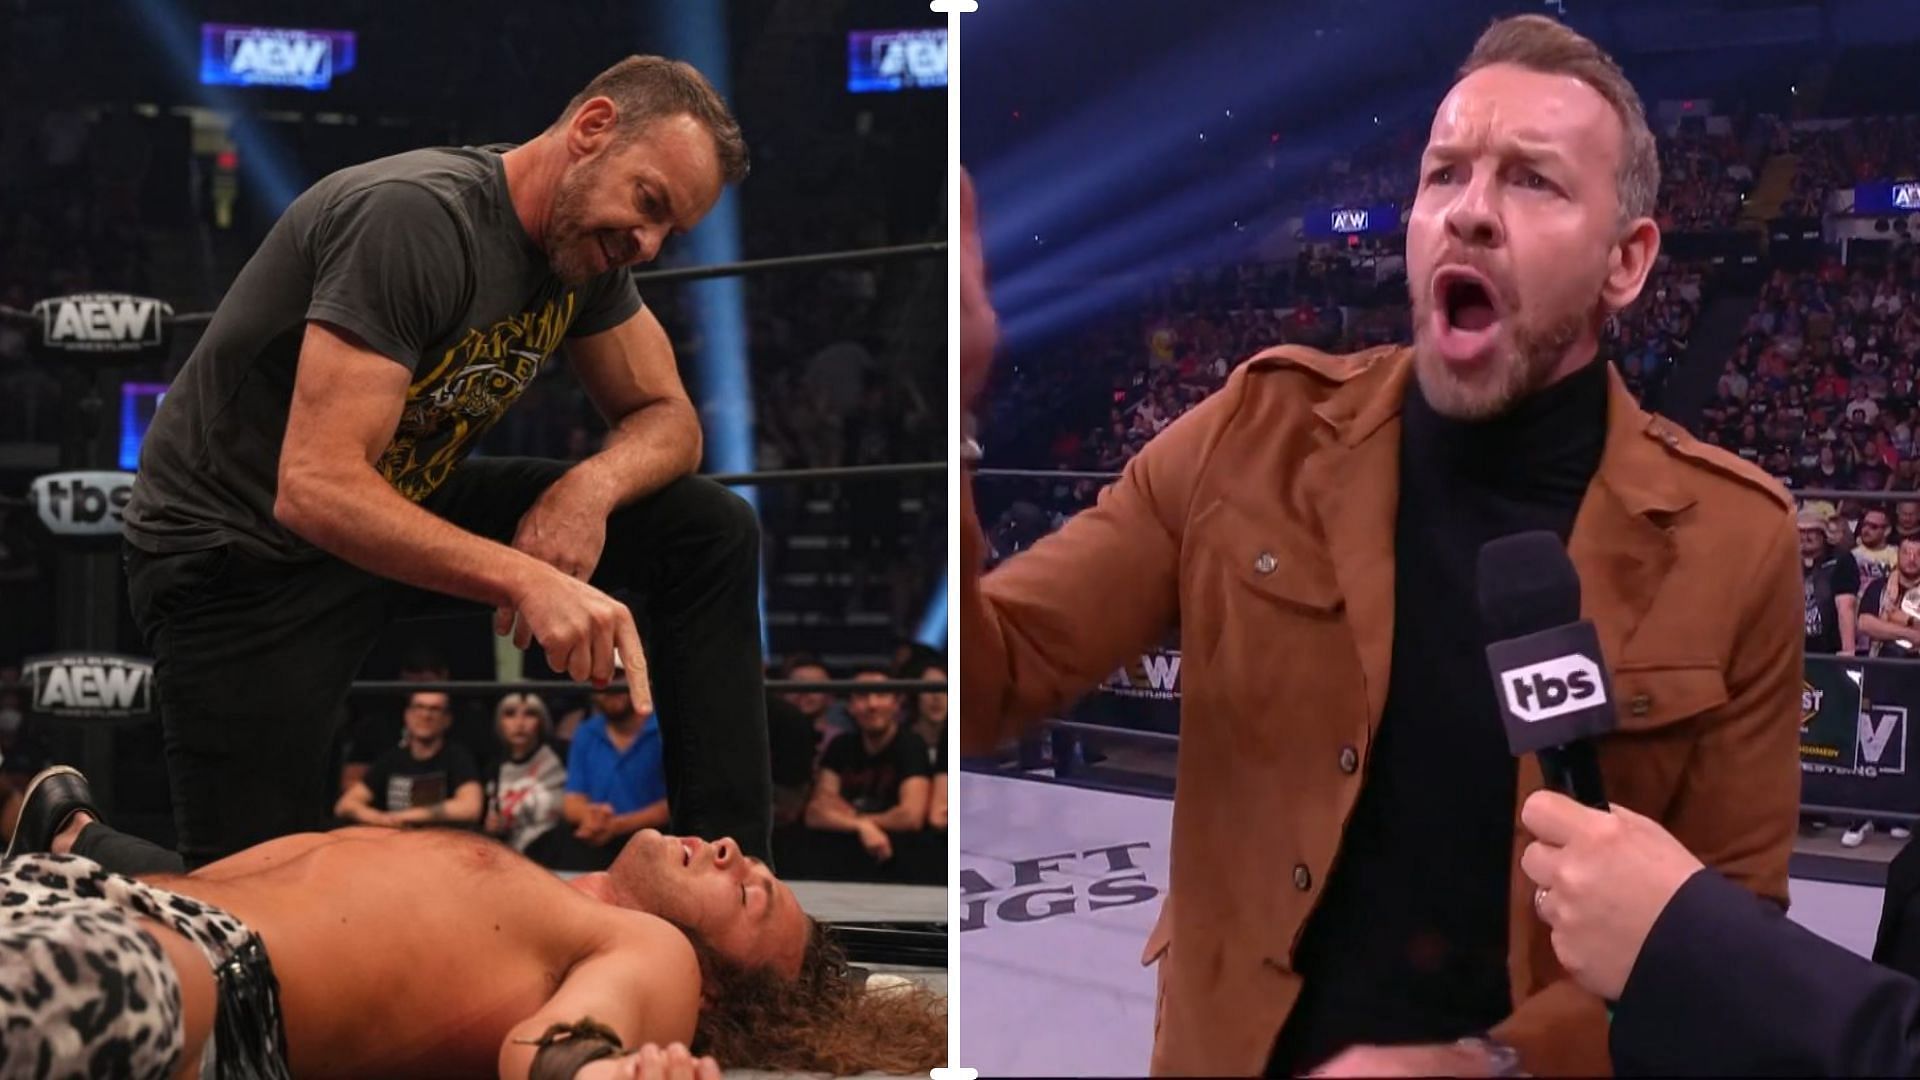 Christian Cage finally addressed AEW fans.